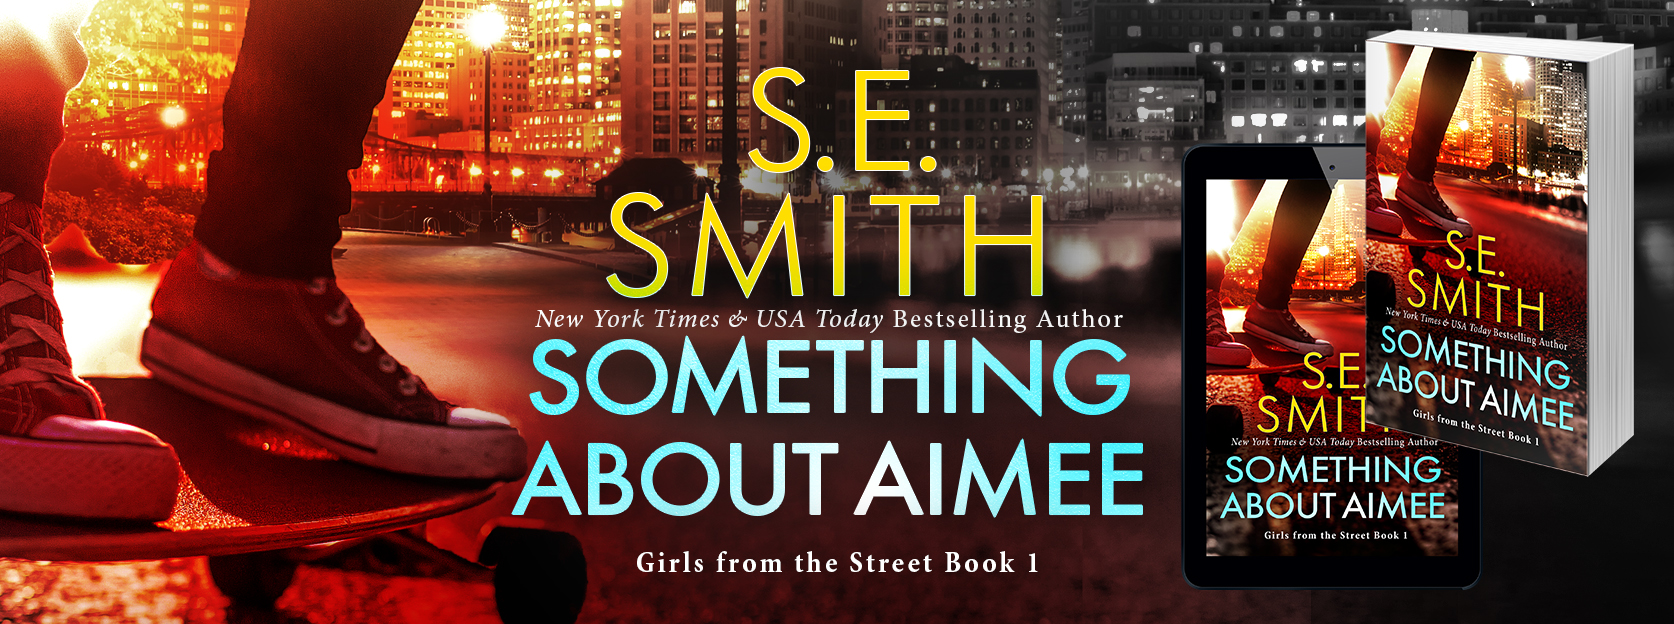 Something About Aimee by SE Smith Banner